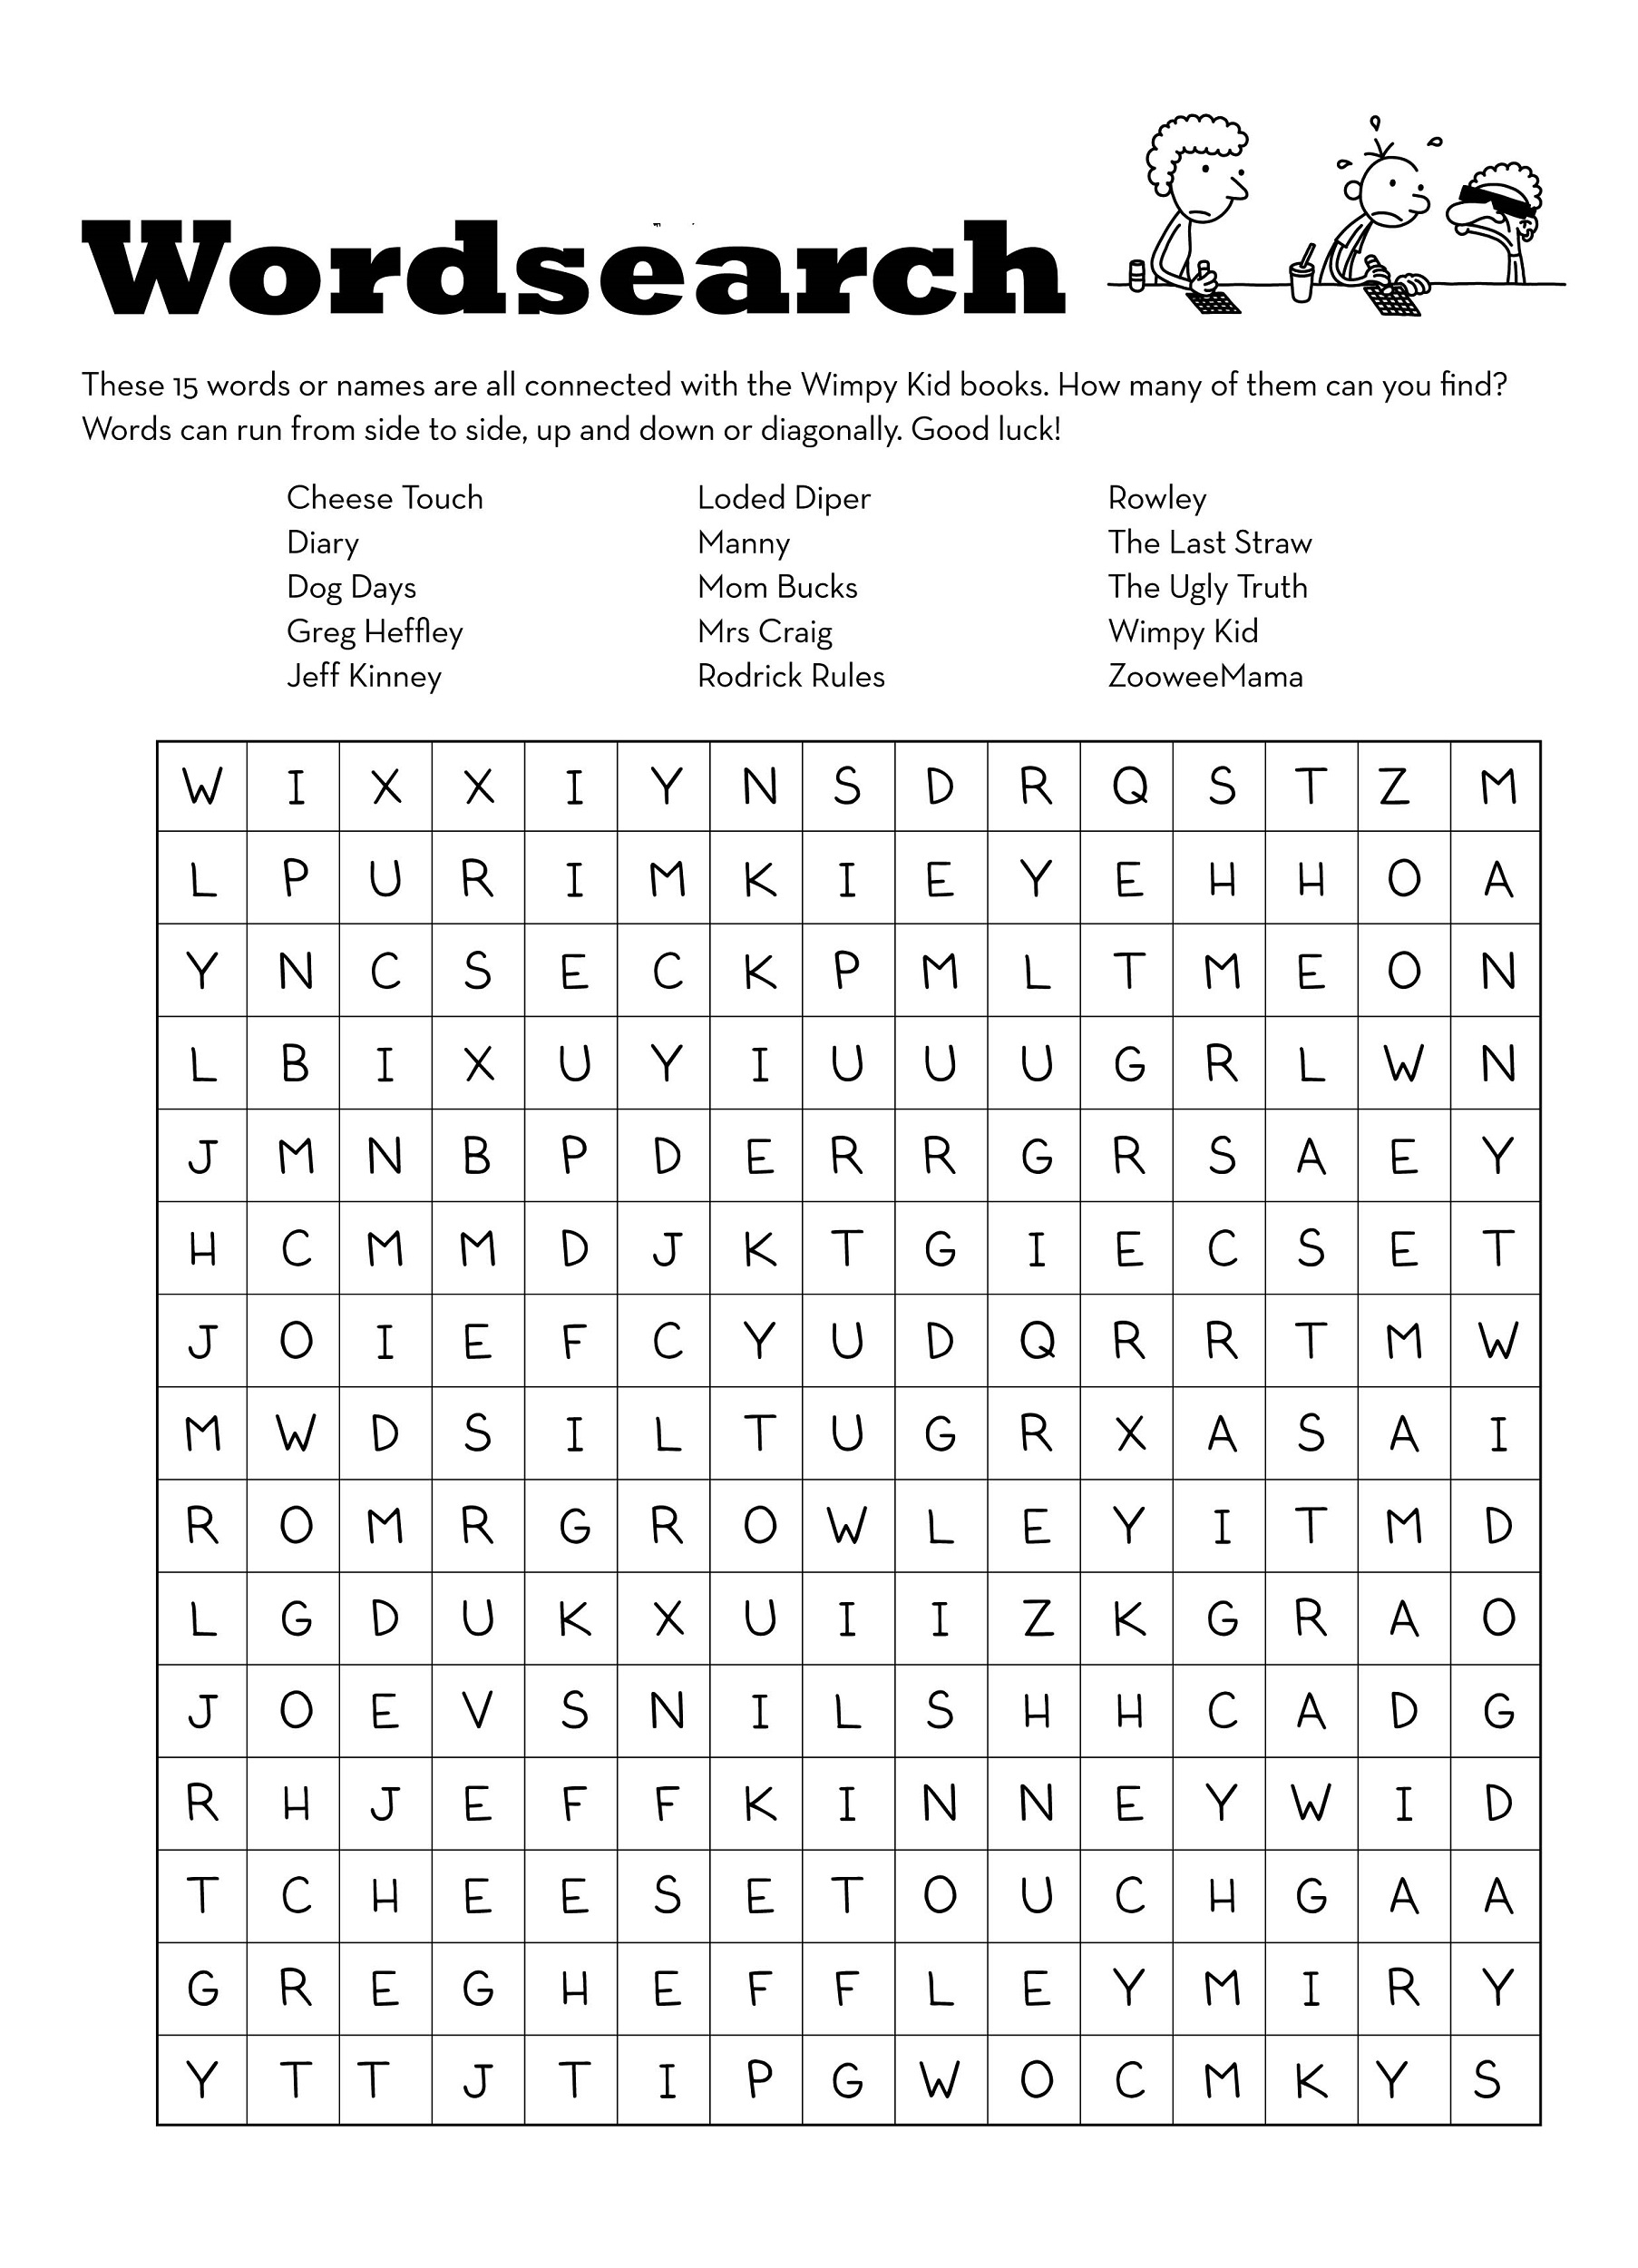 Daily Wordsearches: Word Search 3 - Premier League Players | Word